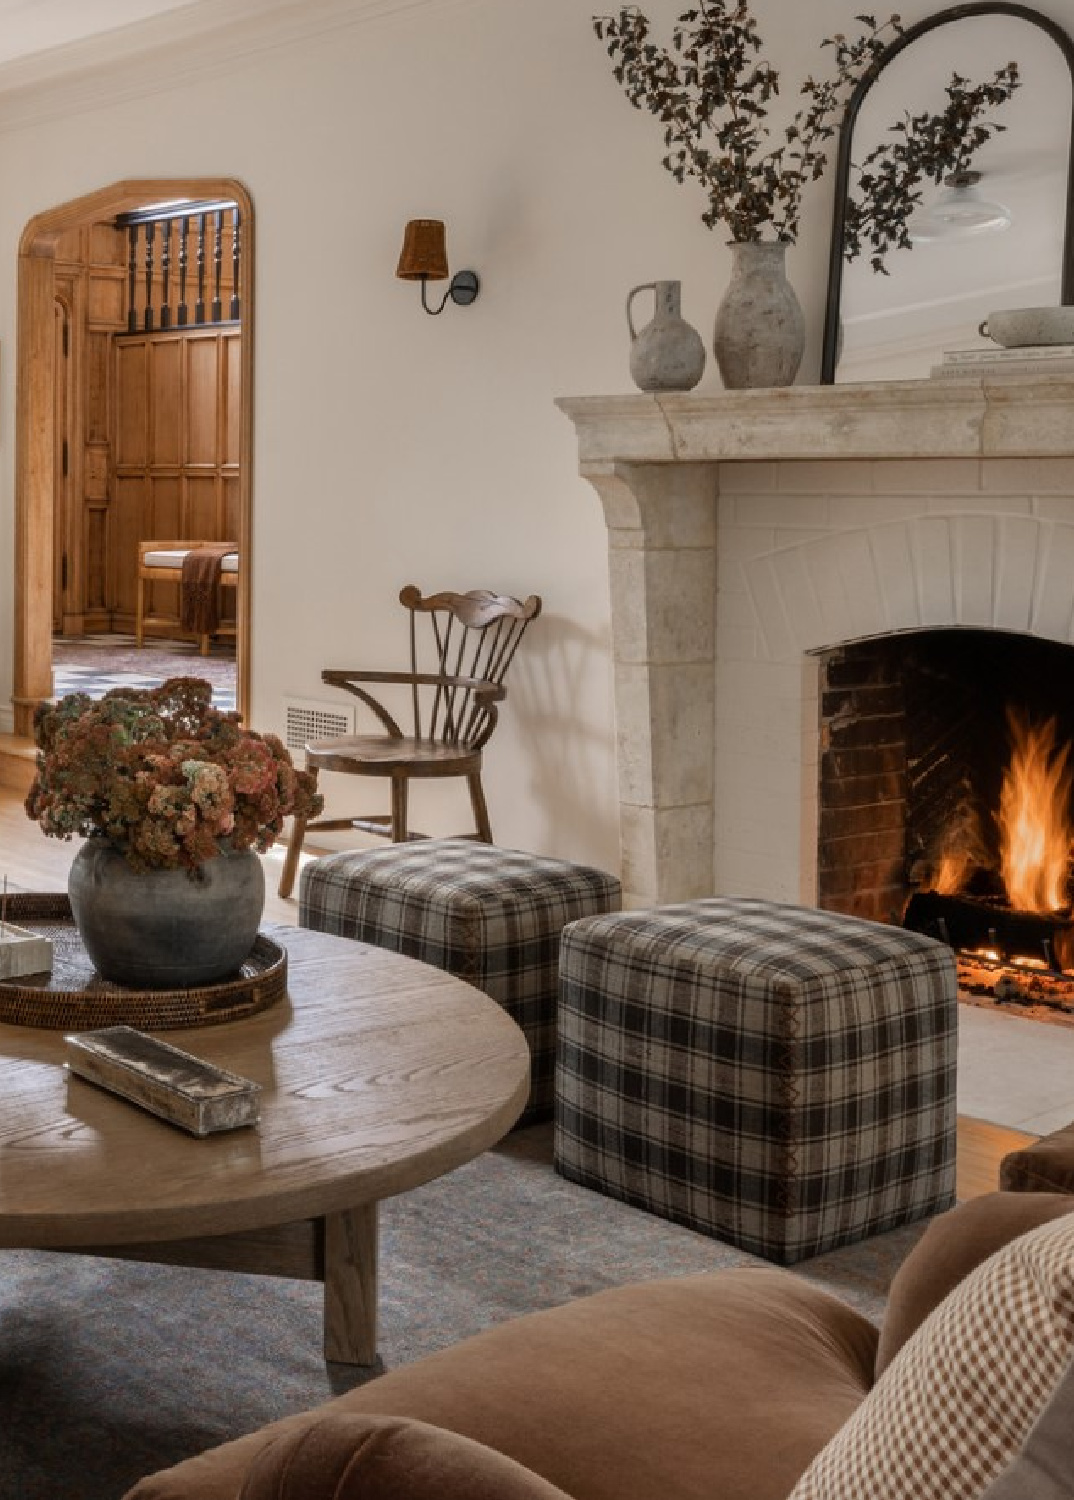 Amber Lewis (Shoppe Amber Interiors) designed fall interior with laid back, luxe, livable, California inspired modern rustic charm. #amberlewis #modernrusticinteriors #californiacool